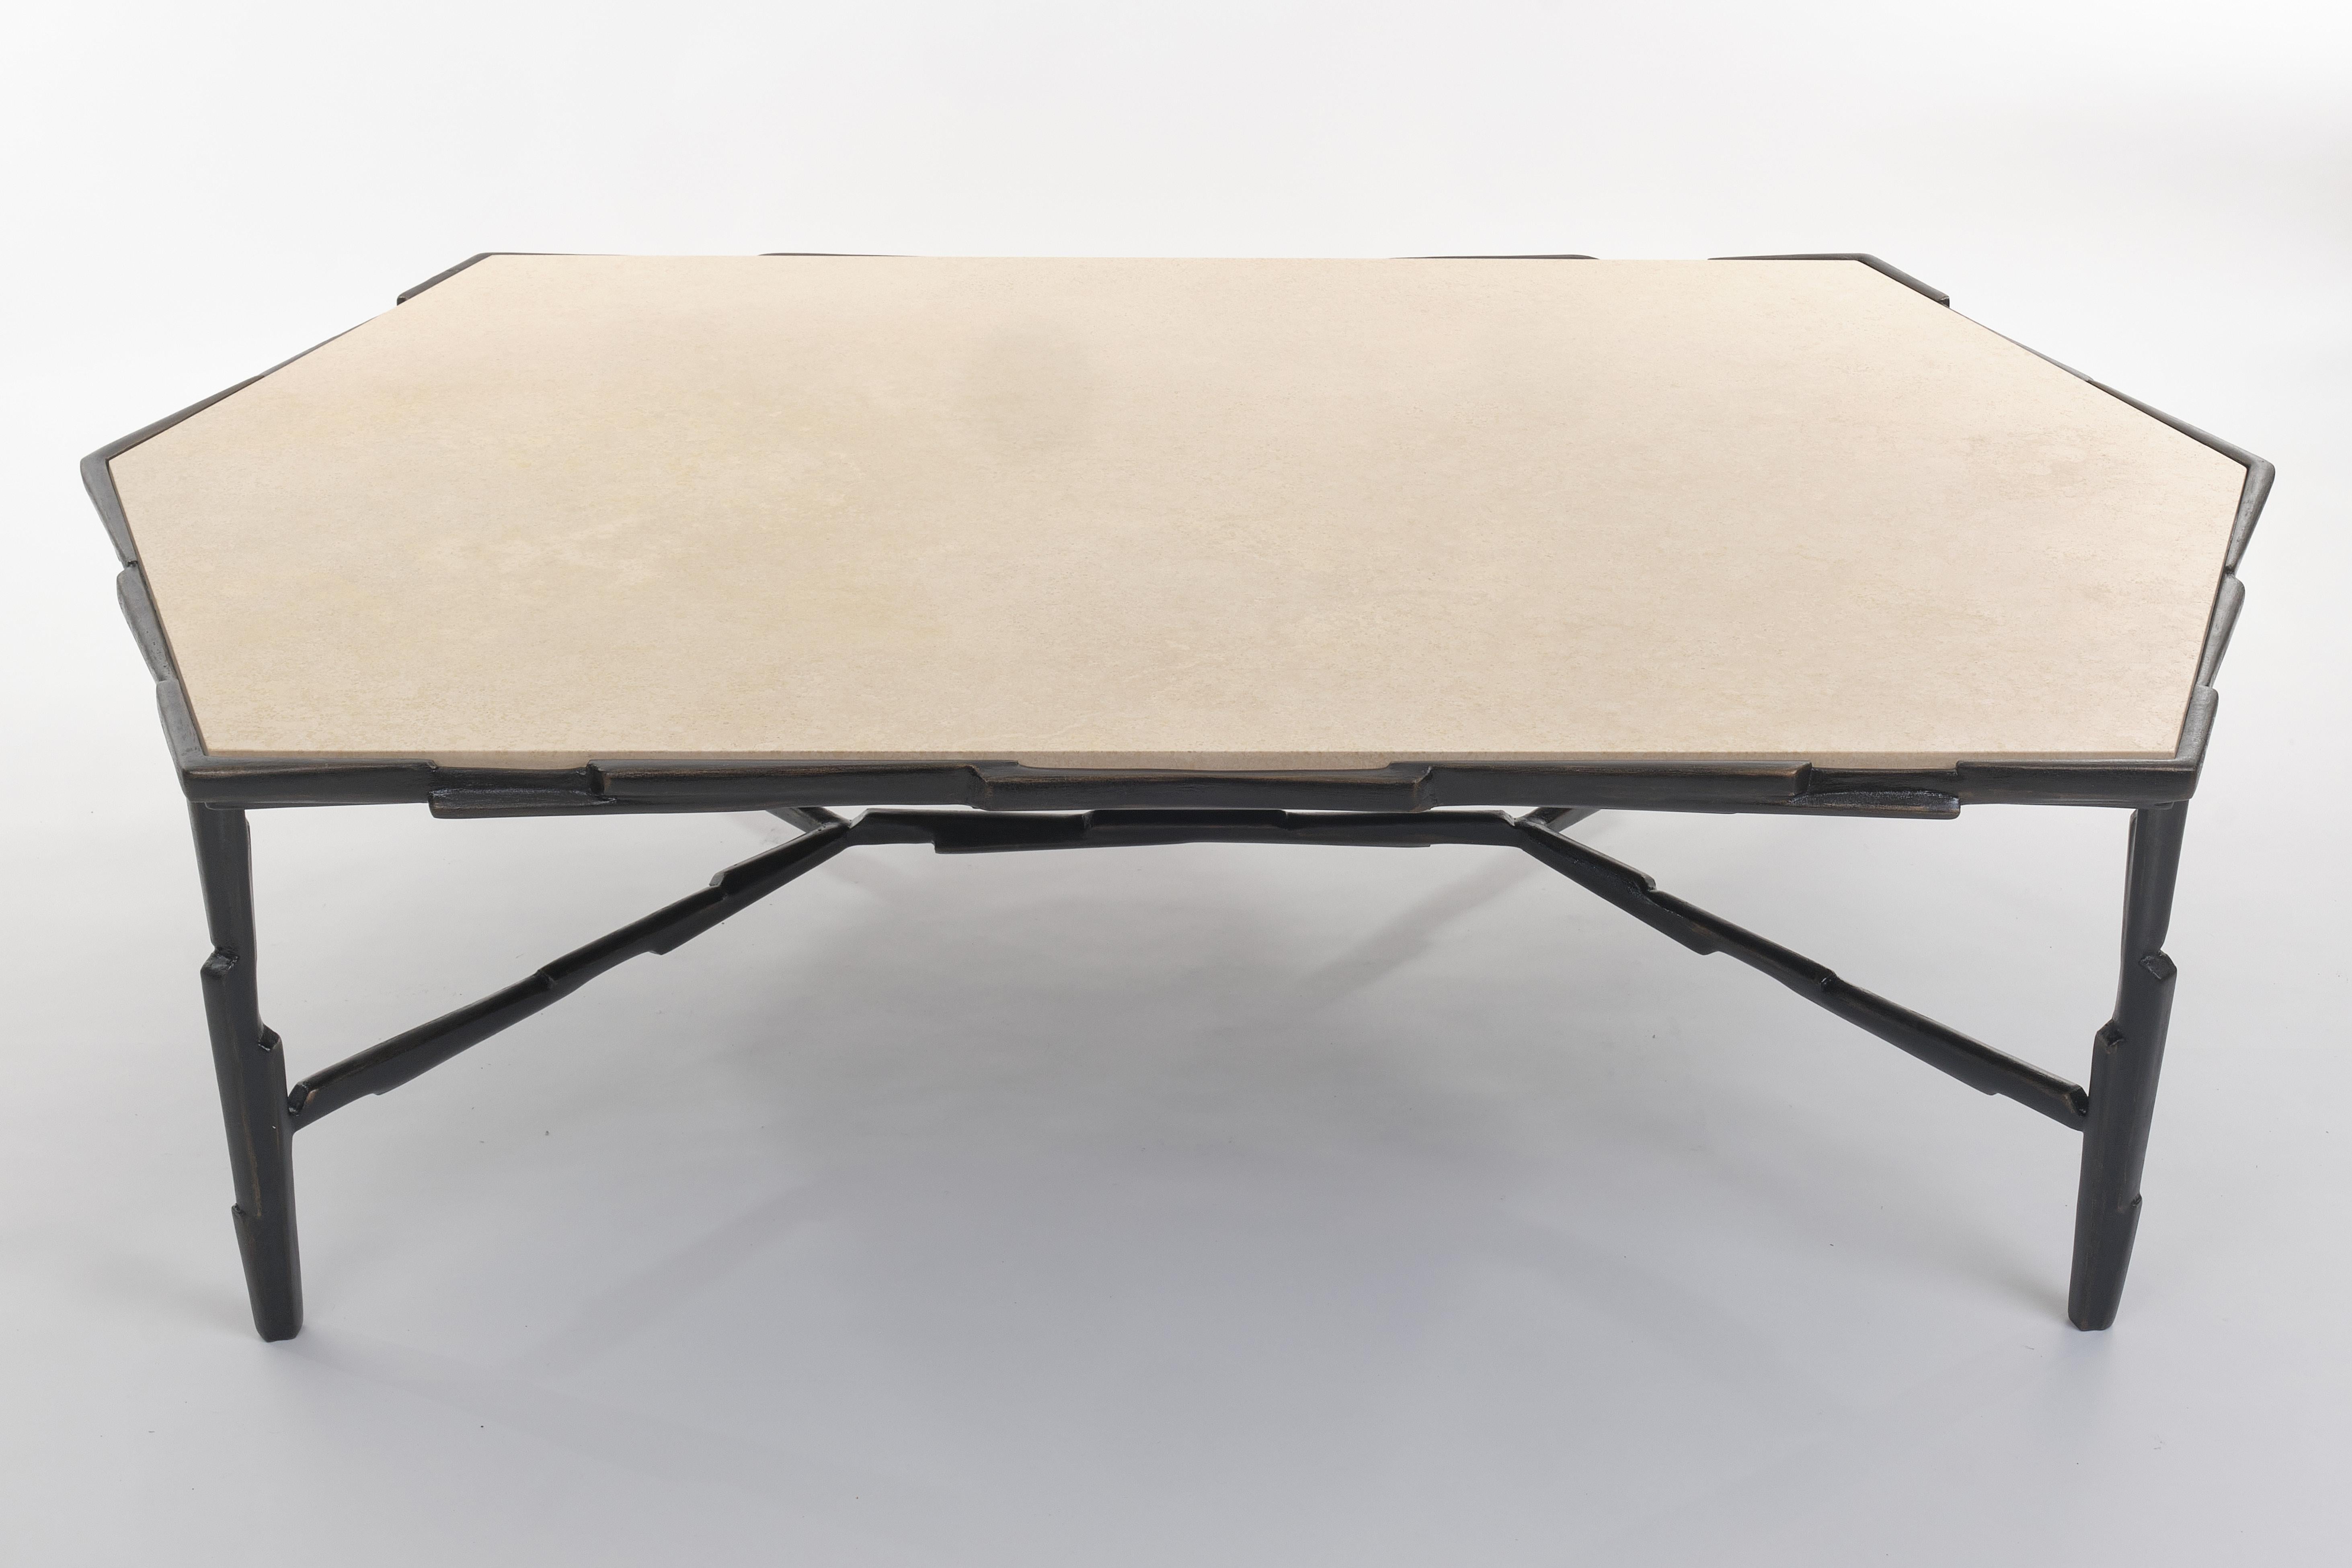 The LINEA coffee table has a strong and dynamic silhouette based on the figure of the triangle. Fragments of metal, shaped and assembled in line with a secret sense of order. Each piece is individually hand sculpted in plaster and unique by its